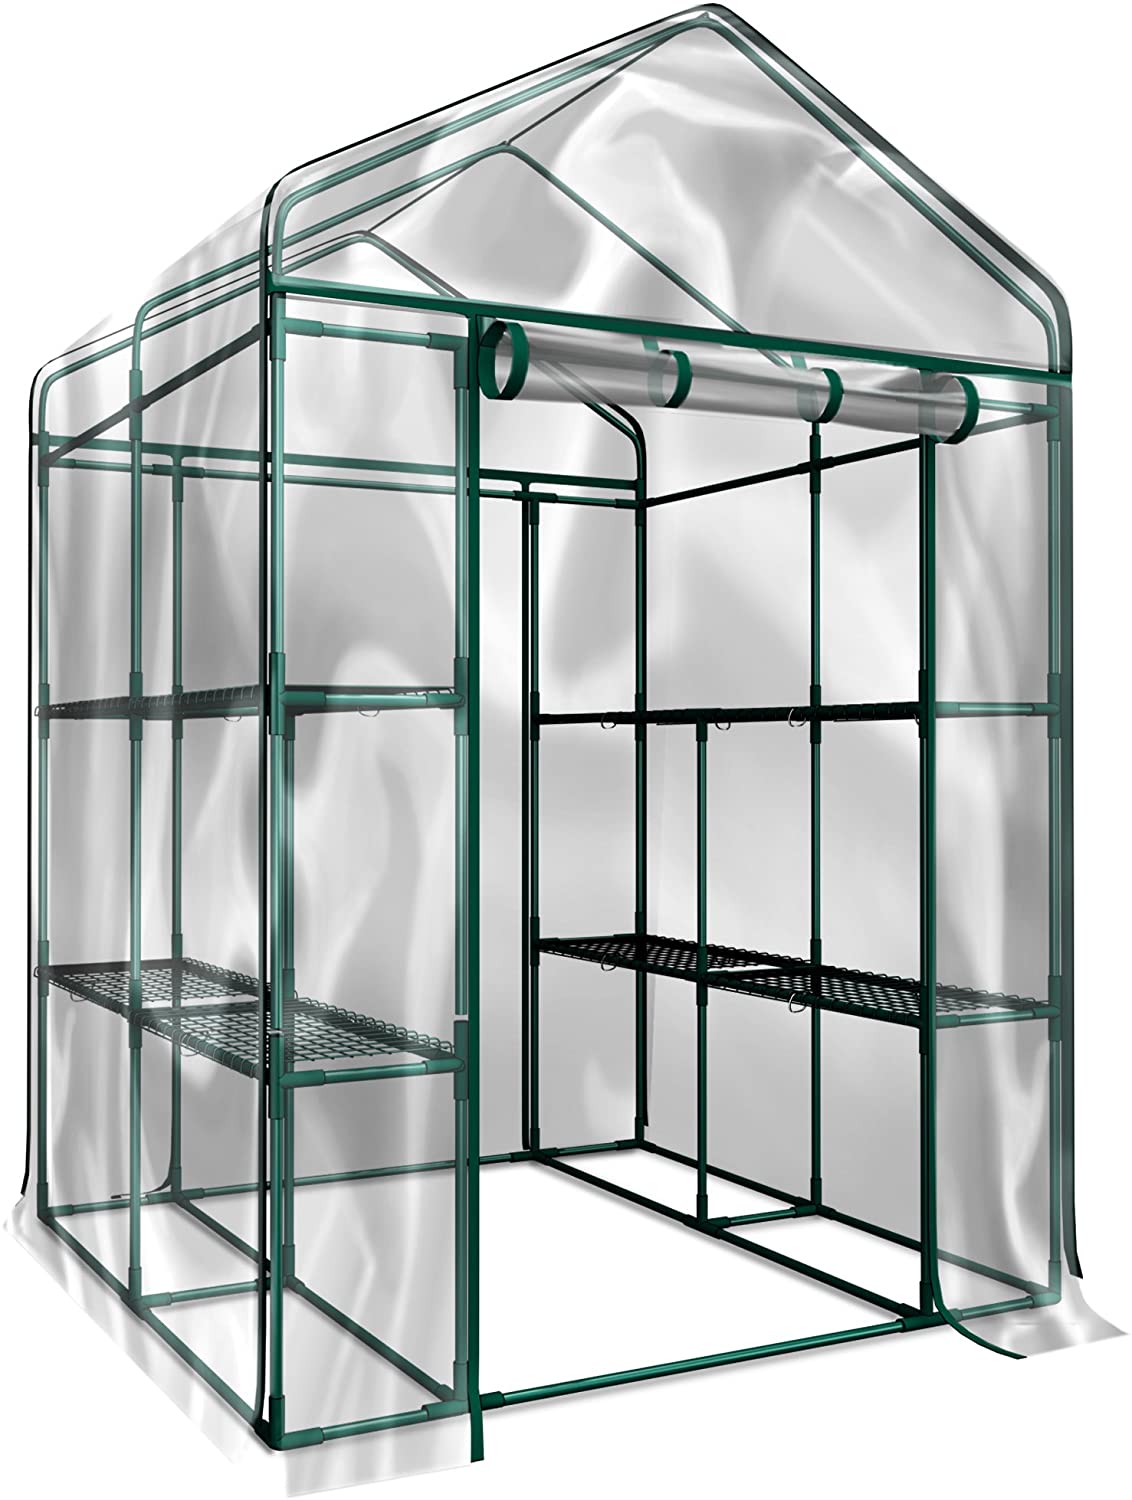 Home-Complete HC-4202 Walk-In Greenhouse